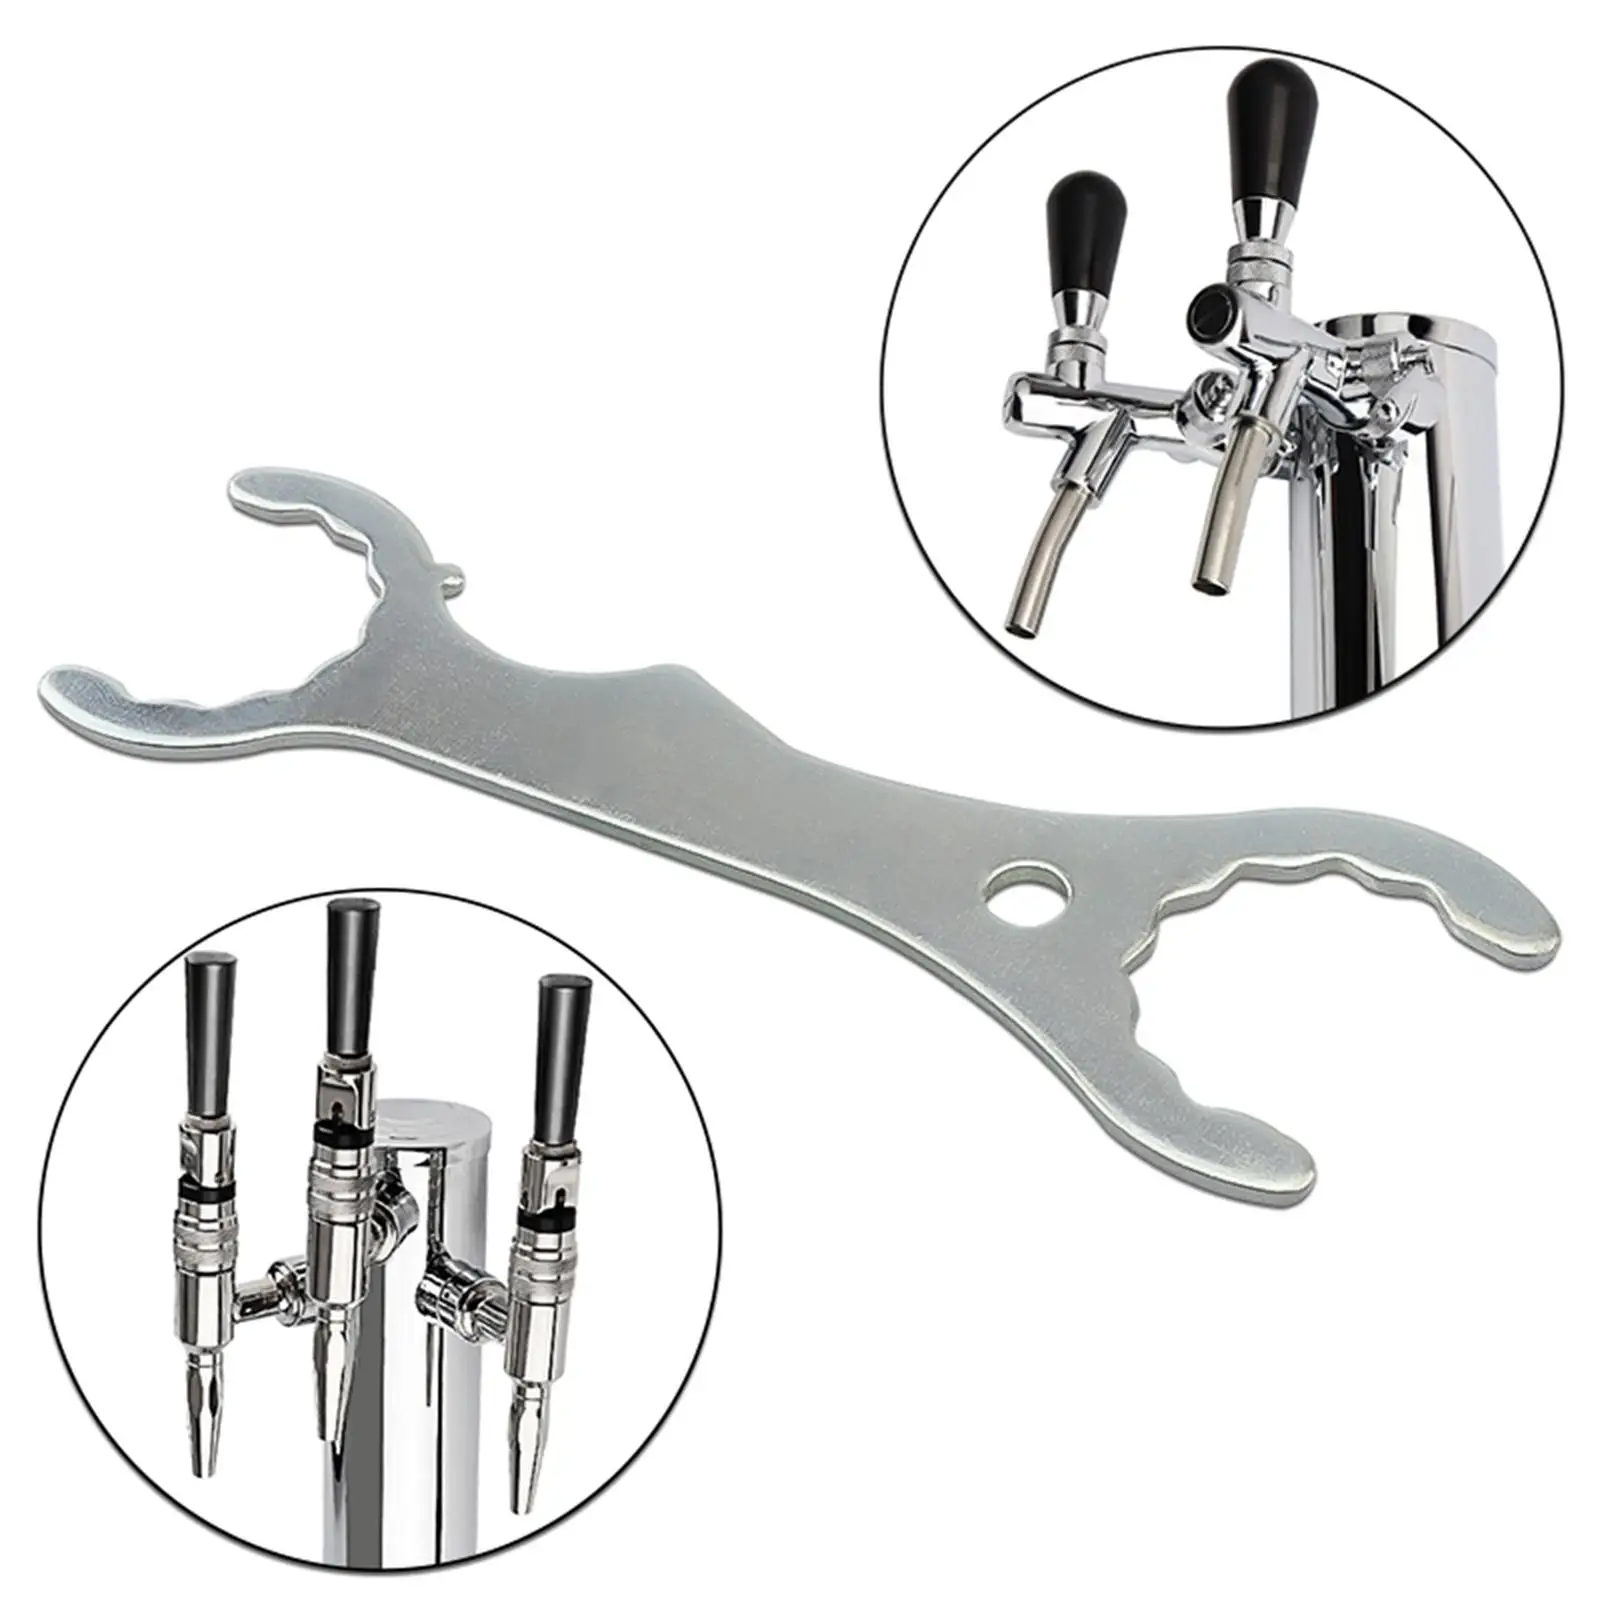 Beer Faucet Wrench Portable Beer Repair Tools Tower Coupler Tools Shank